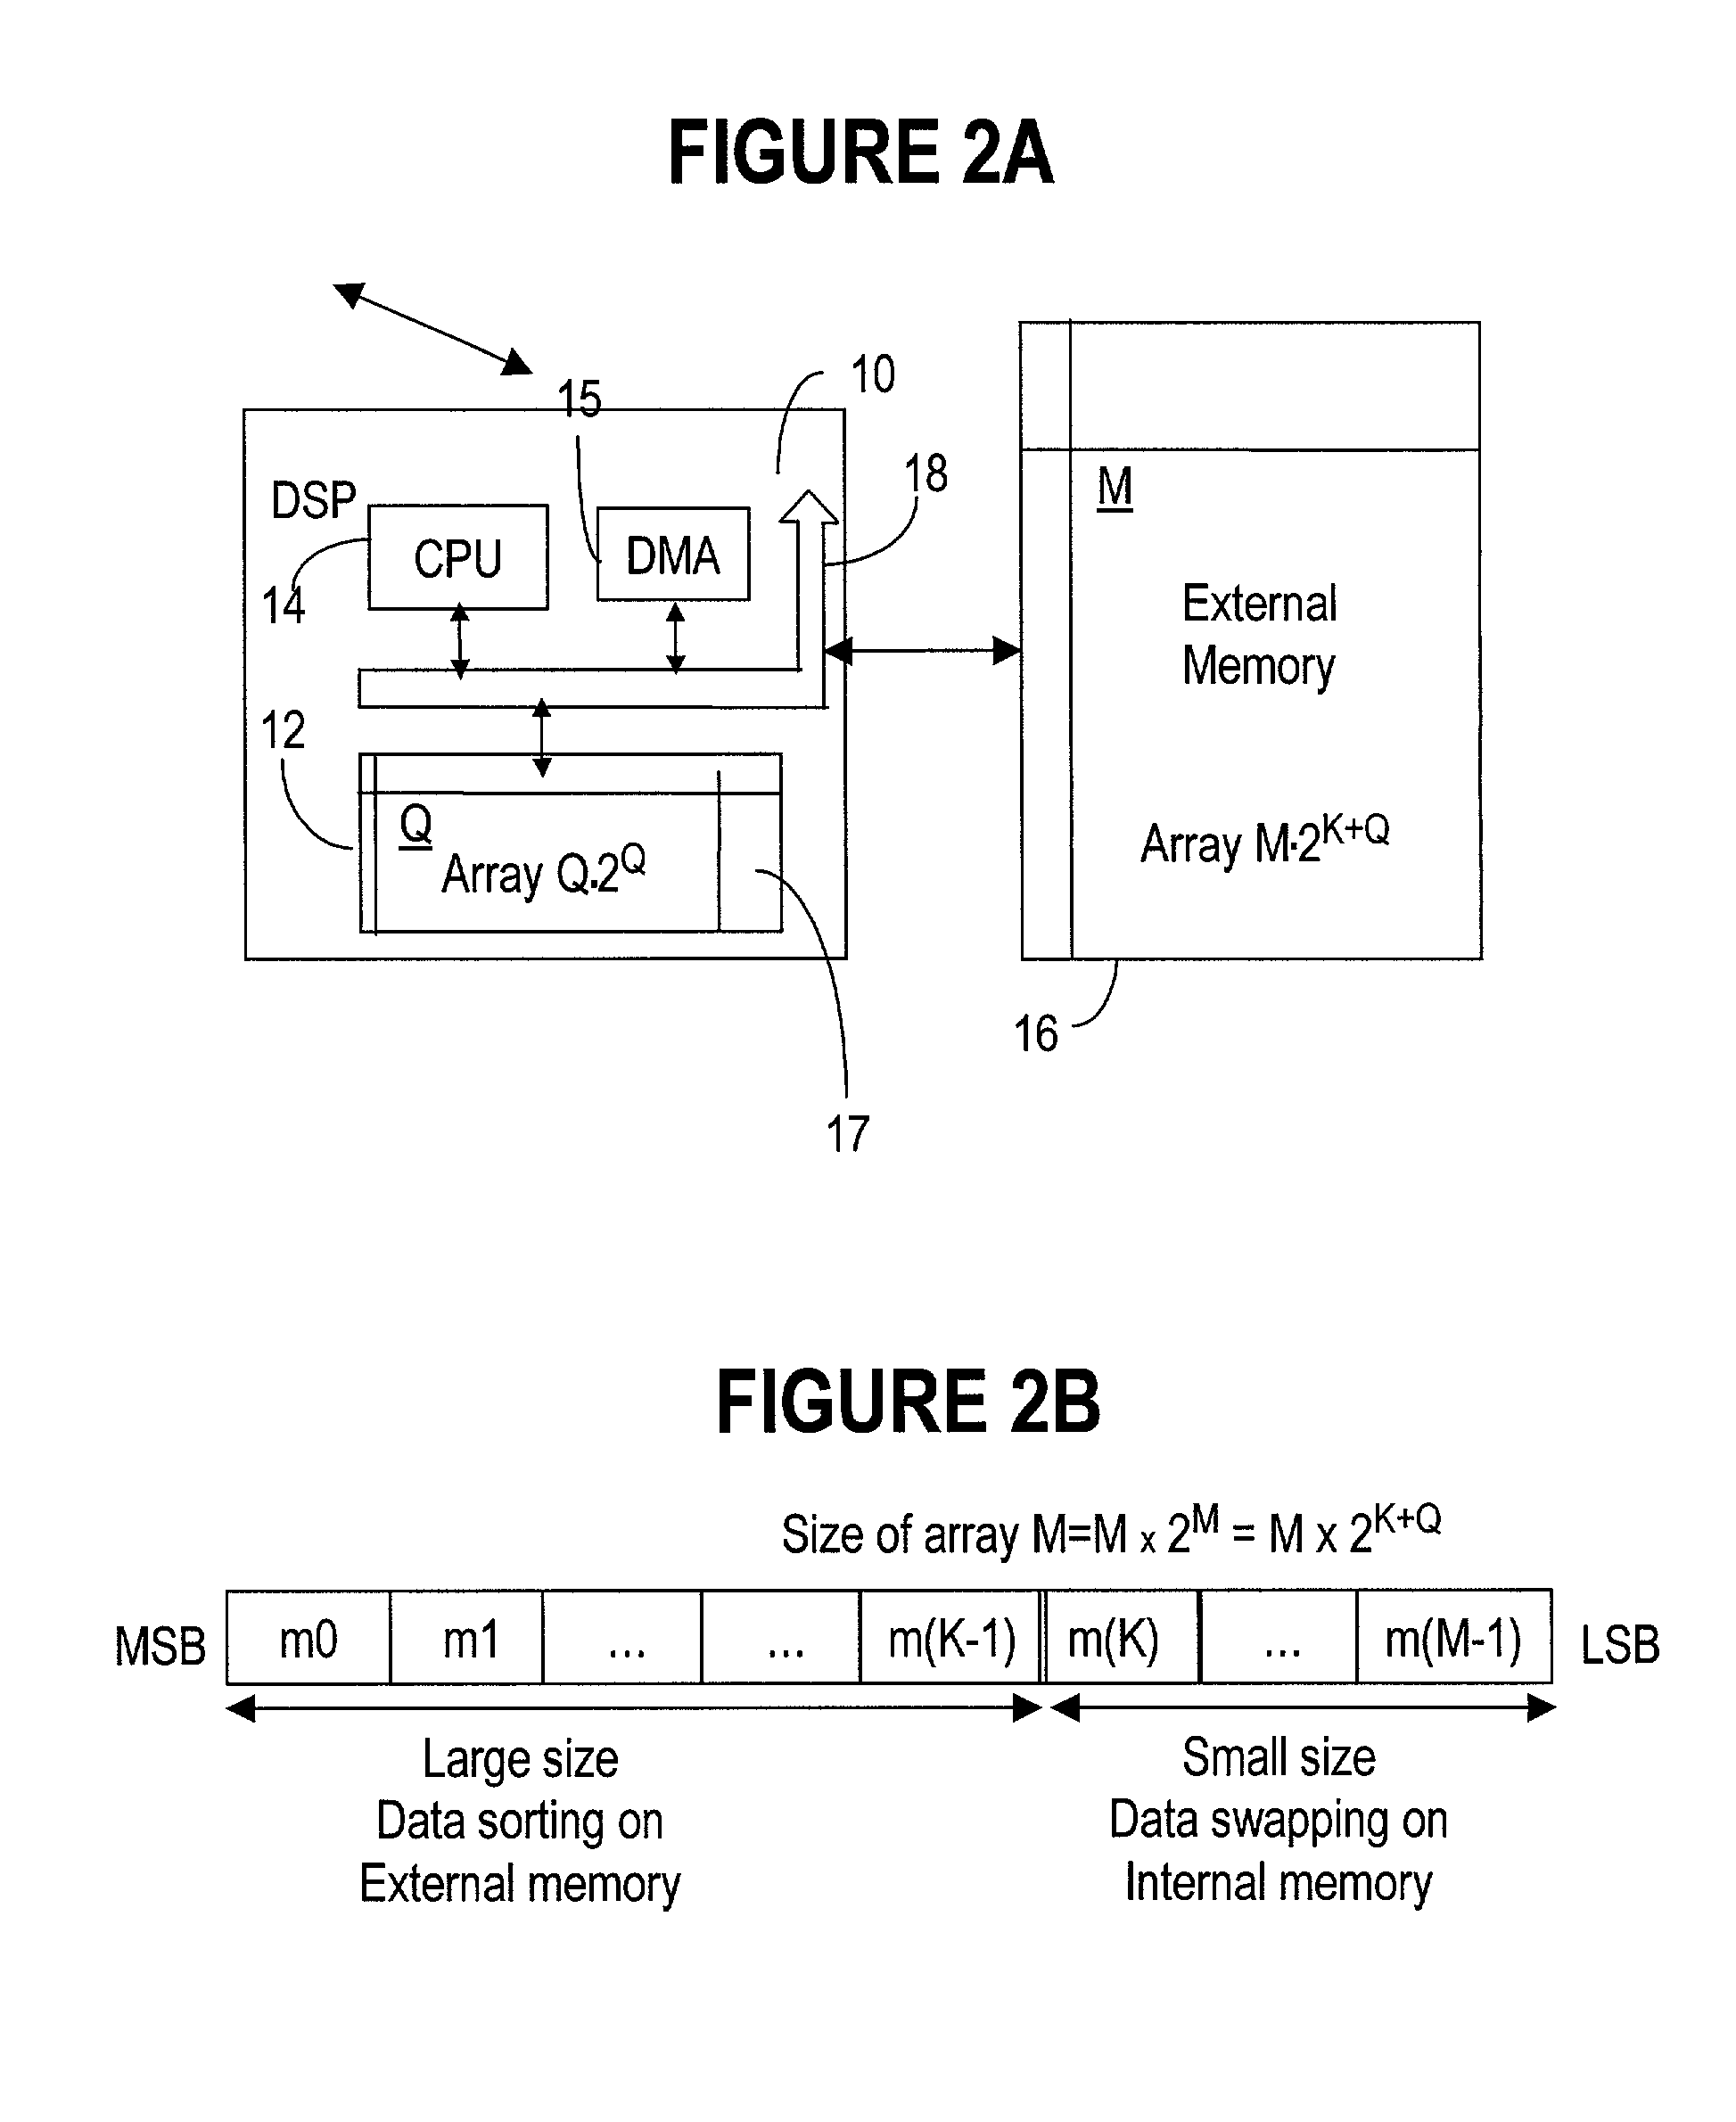 Real-time method for bit-reversal of large size arrays